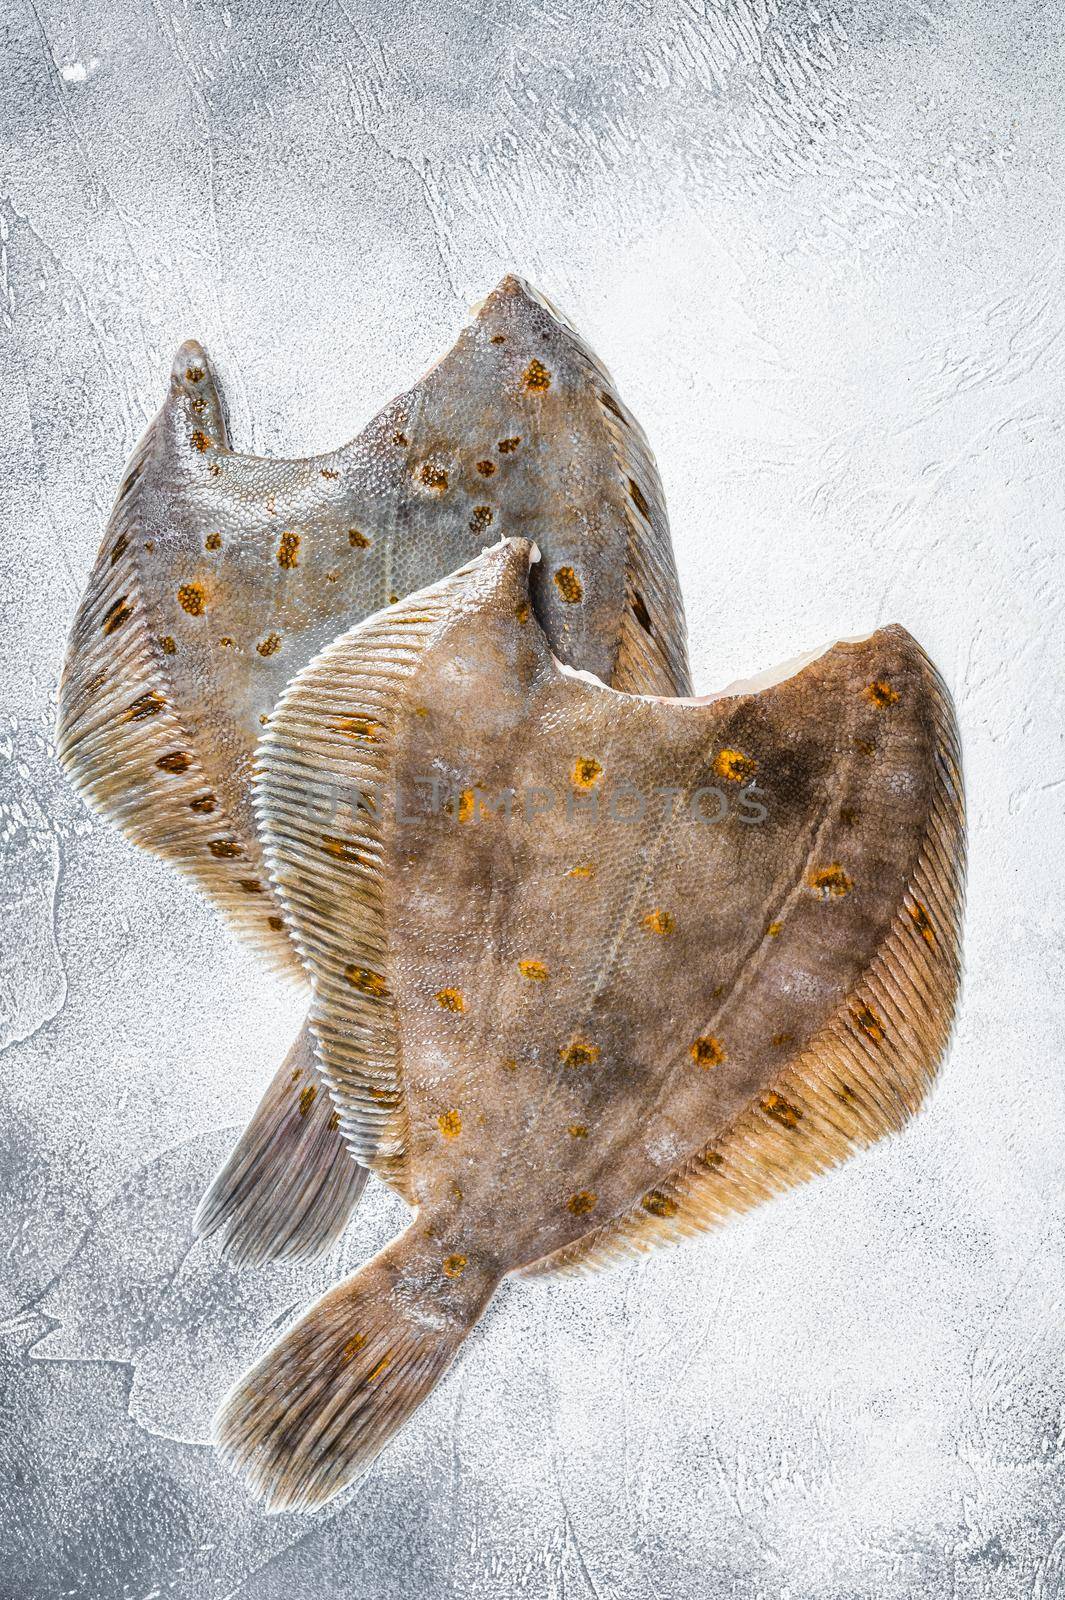 Raw whole flounder flatfish fish on kitchen table. White background. Top view by Composter